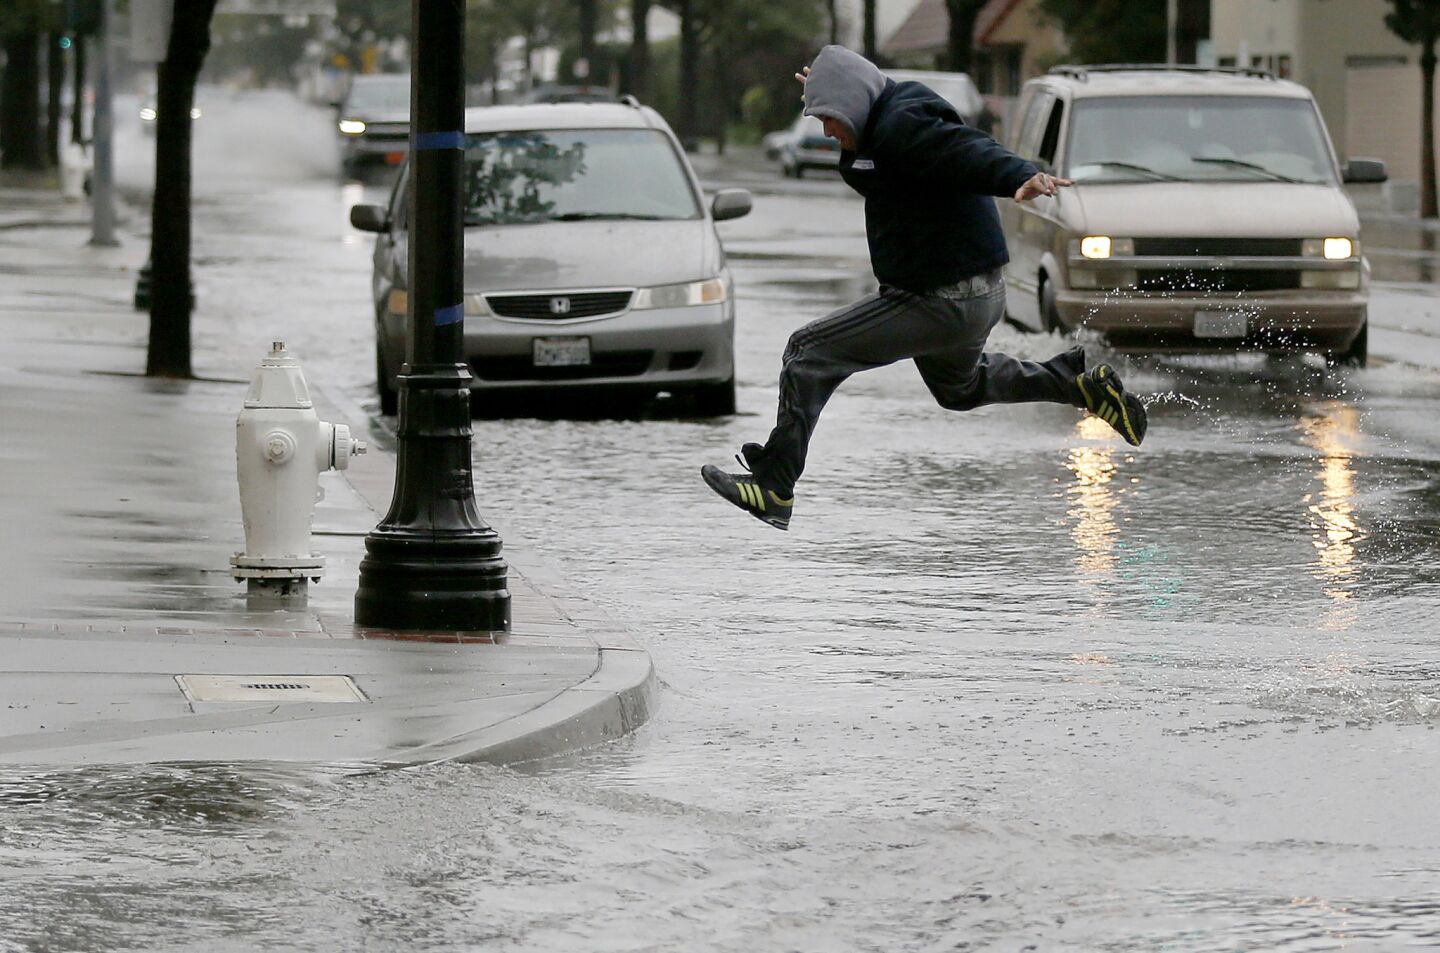 A pedestrian takes to flight crossing 4th Street in Santa Ana after heavy rain flooded the area.